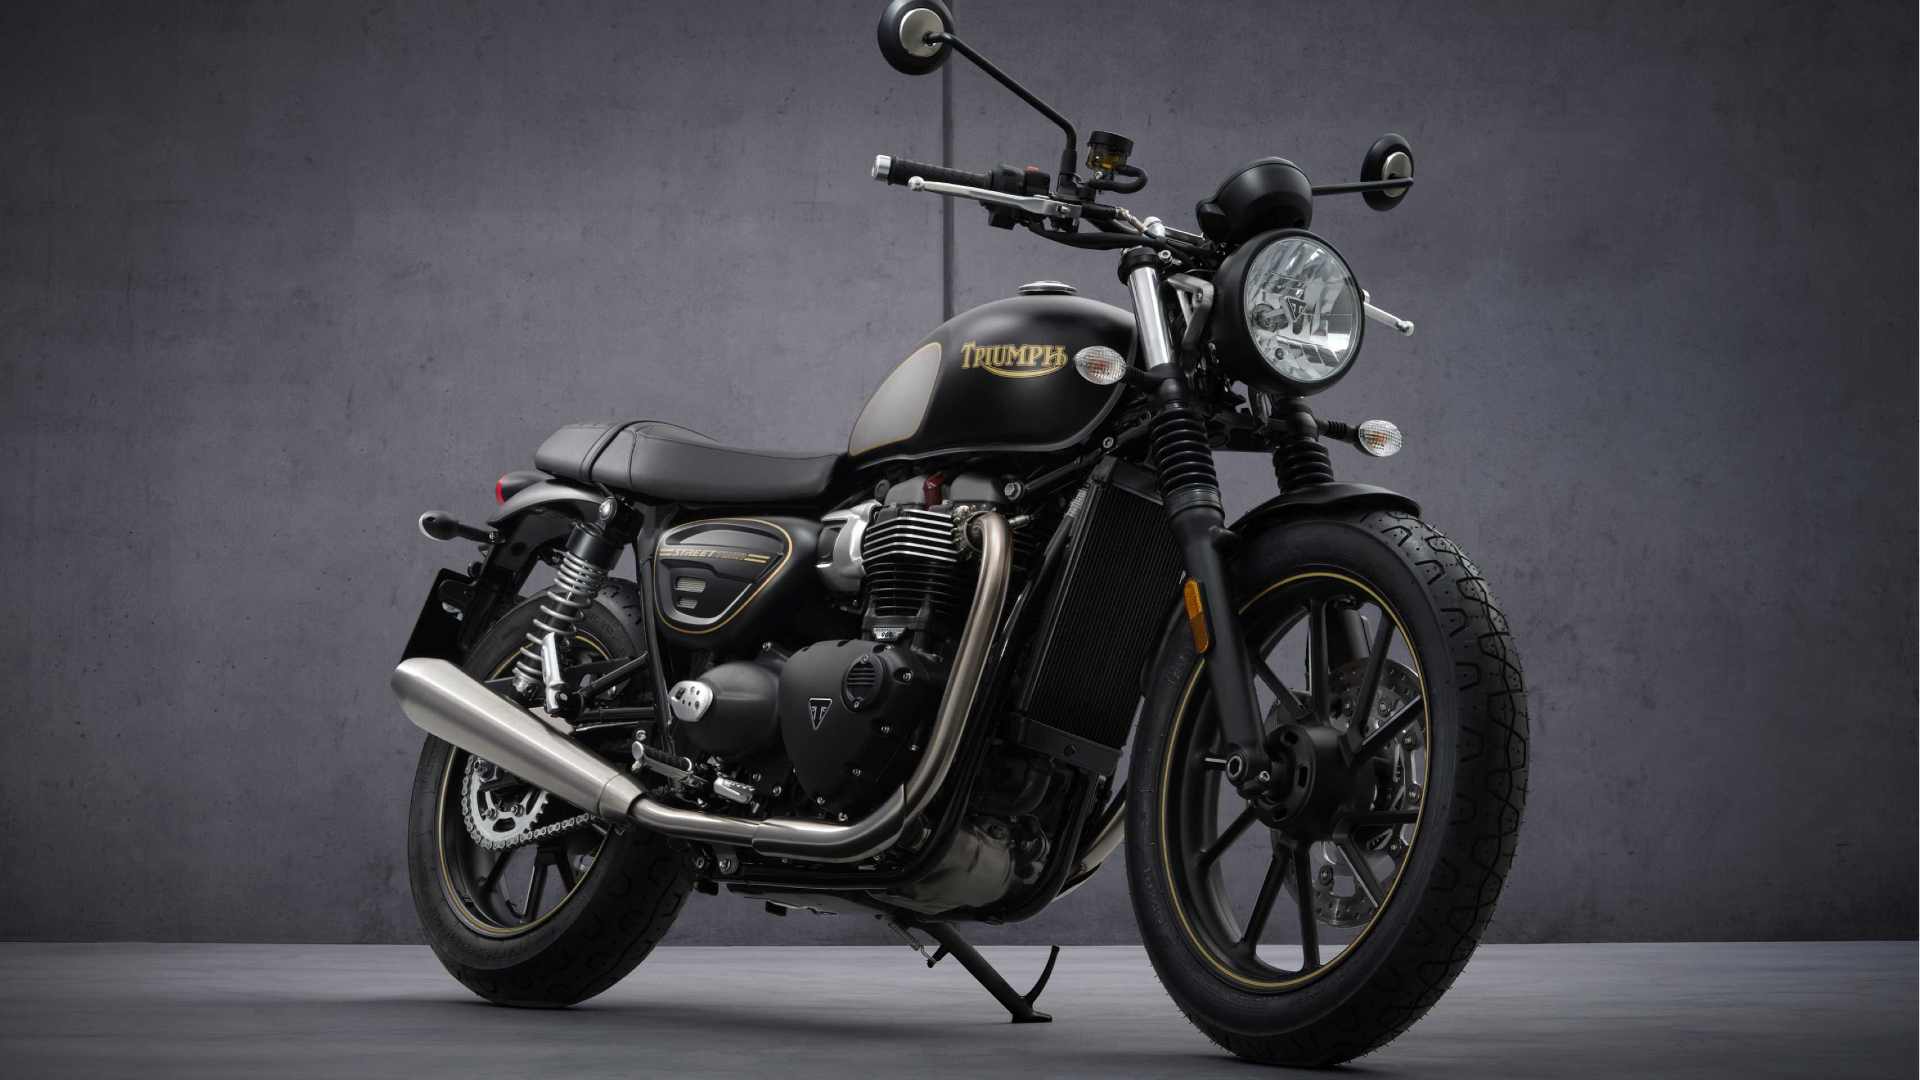 Just 1,000 examples of the Triumph Street Twin Gold Line edition will be built. Image: Triumph Motorcycles